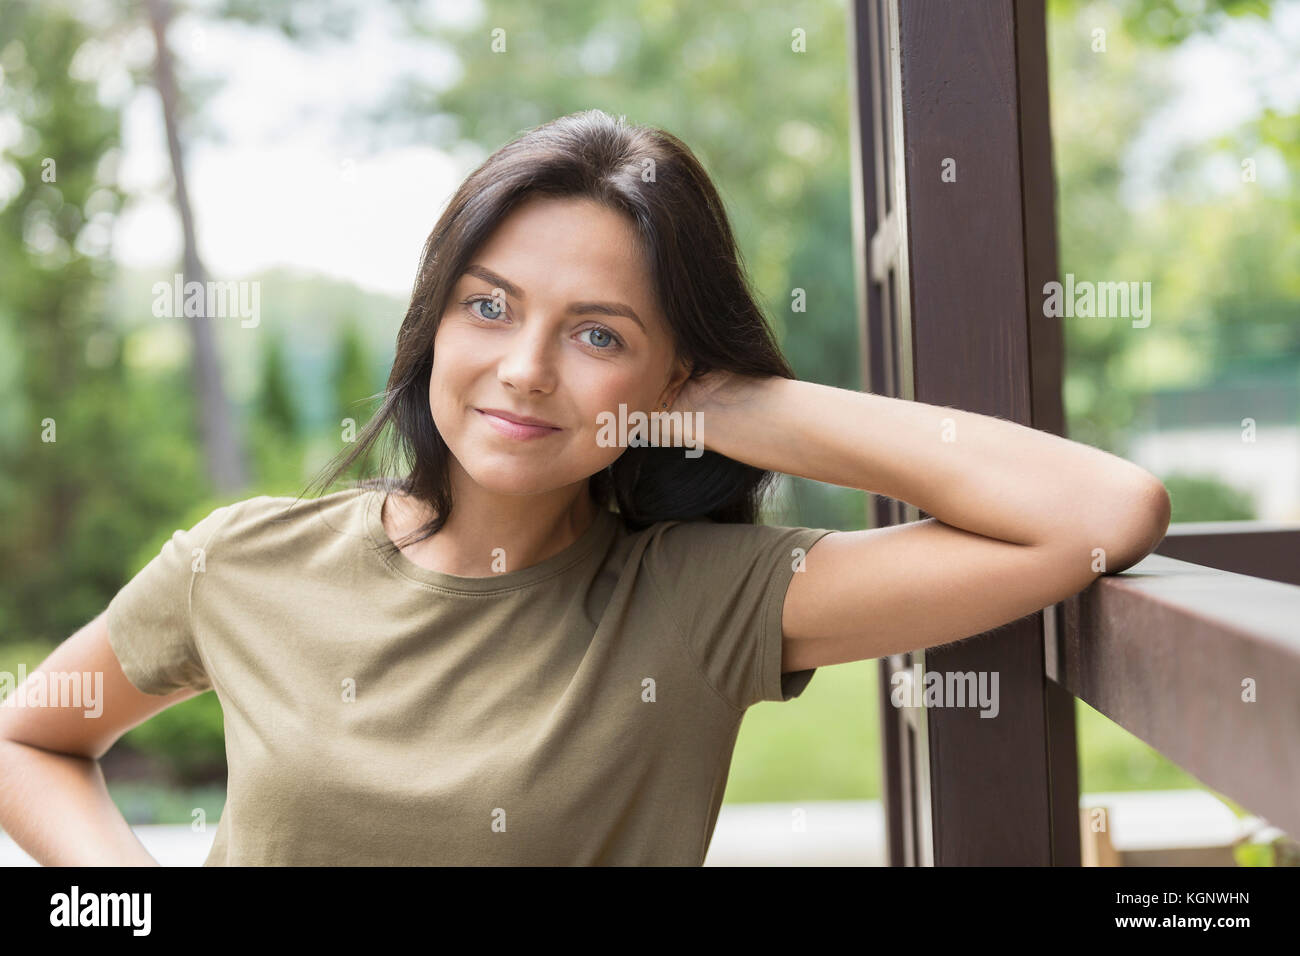 Portrait of smiling woman leaning on railing at yard Banque D'Images